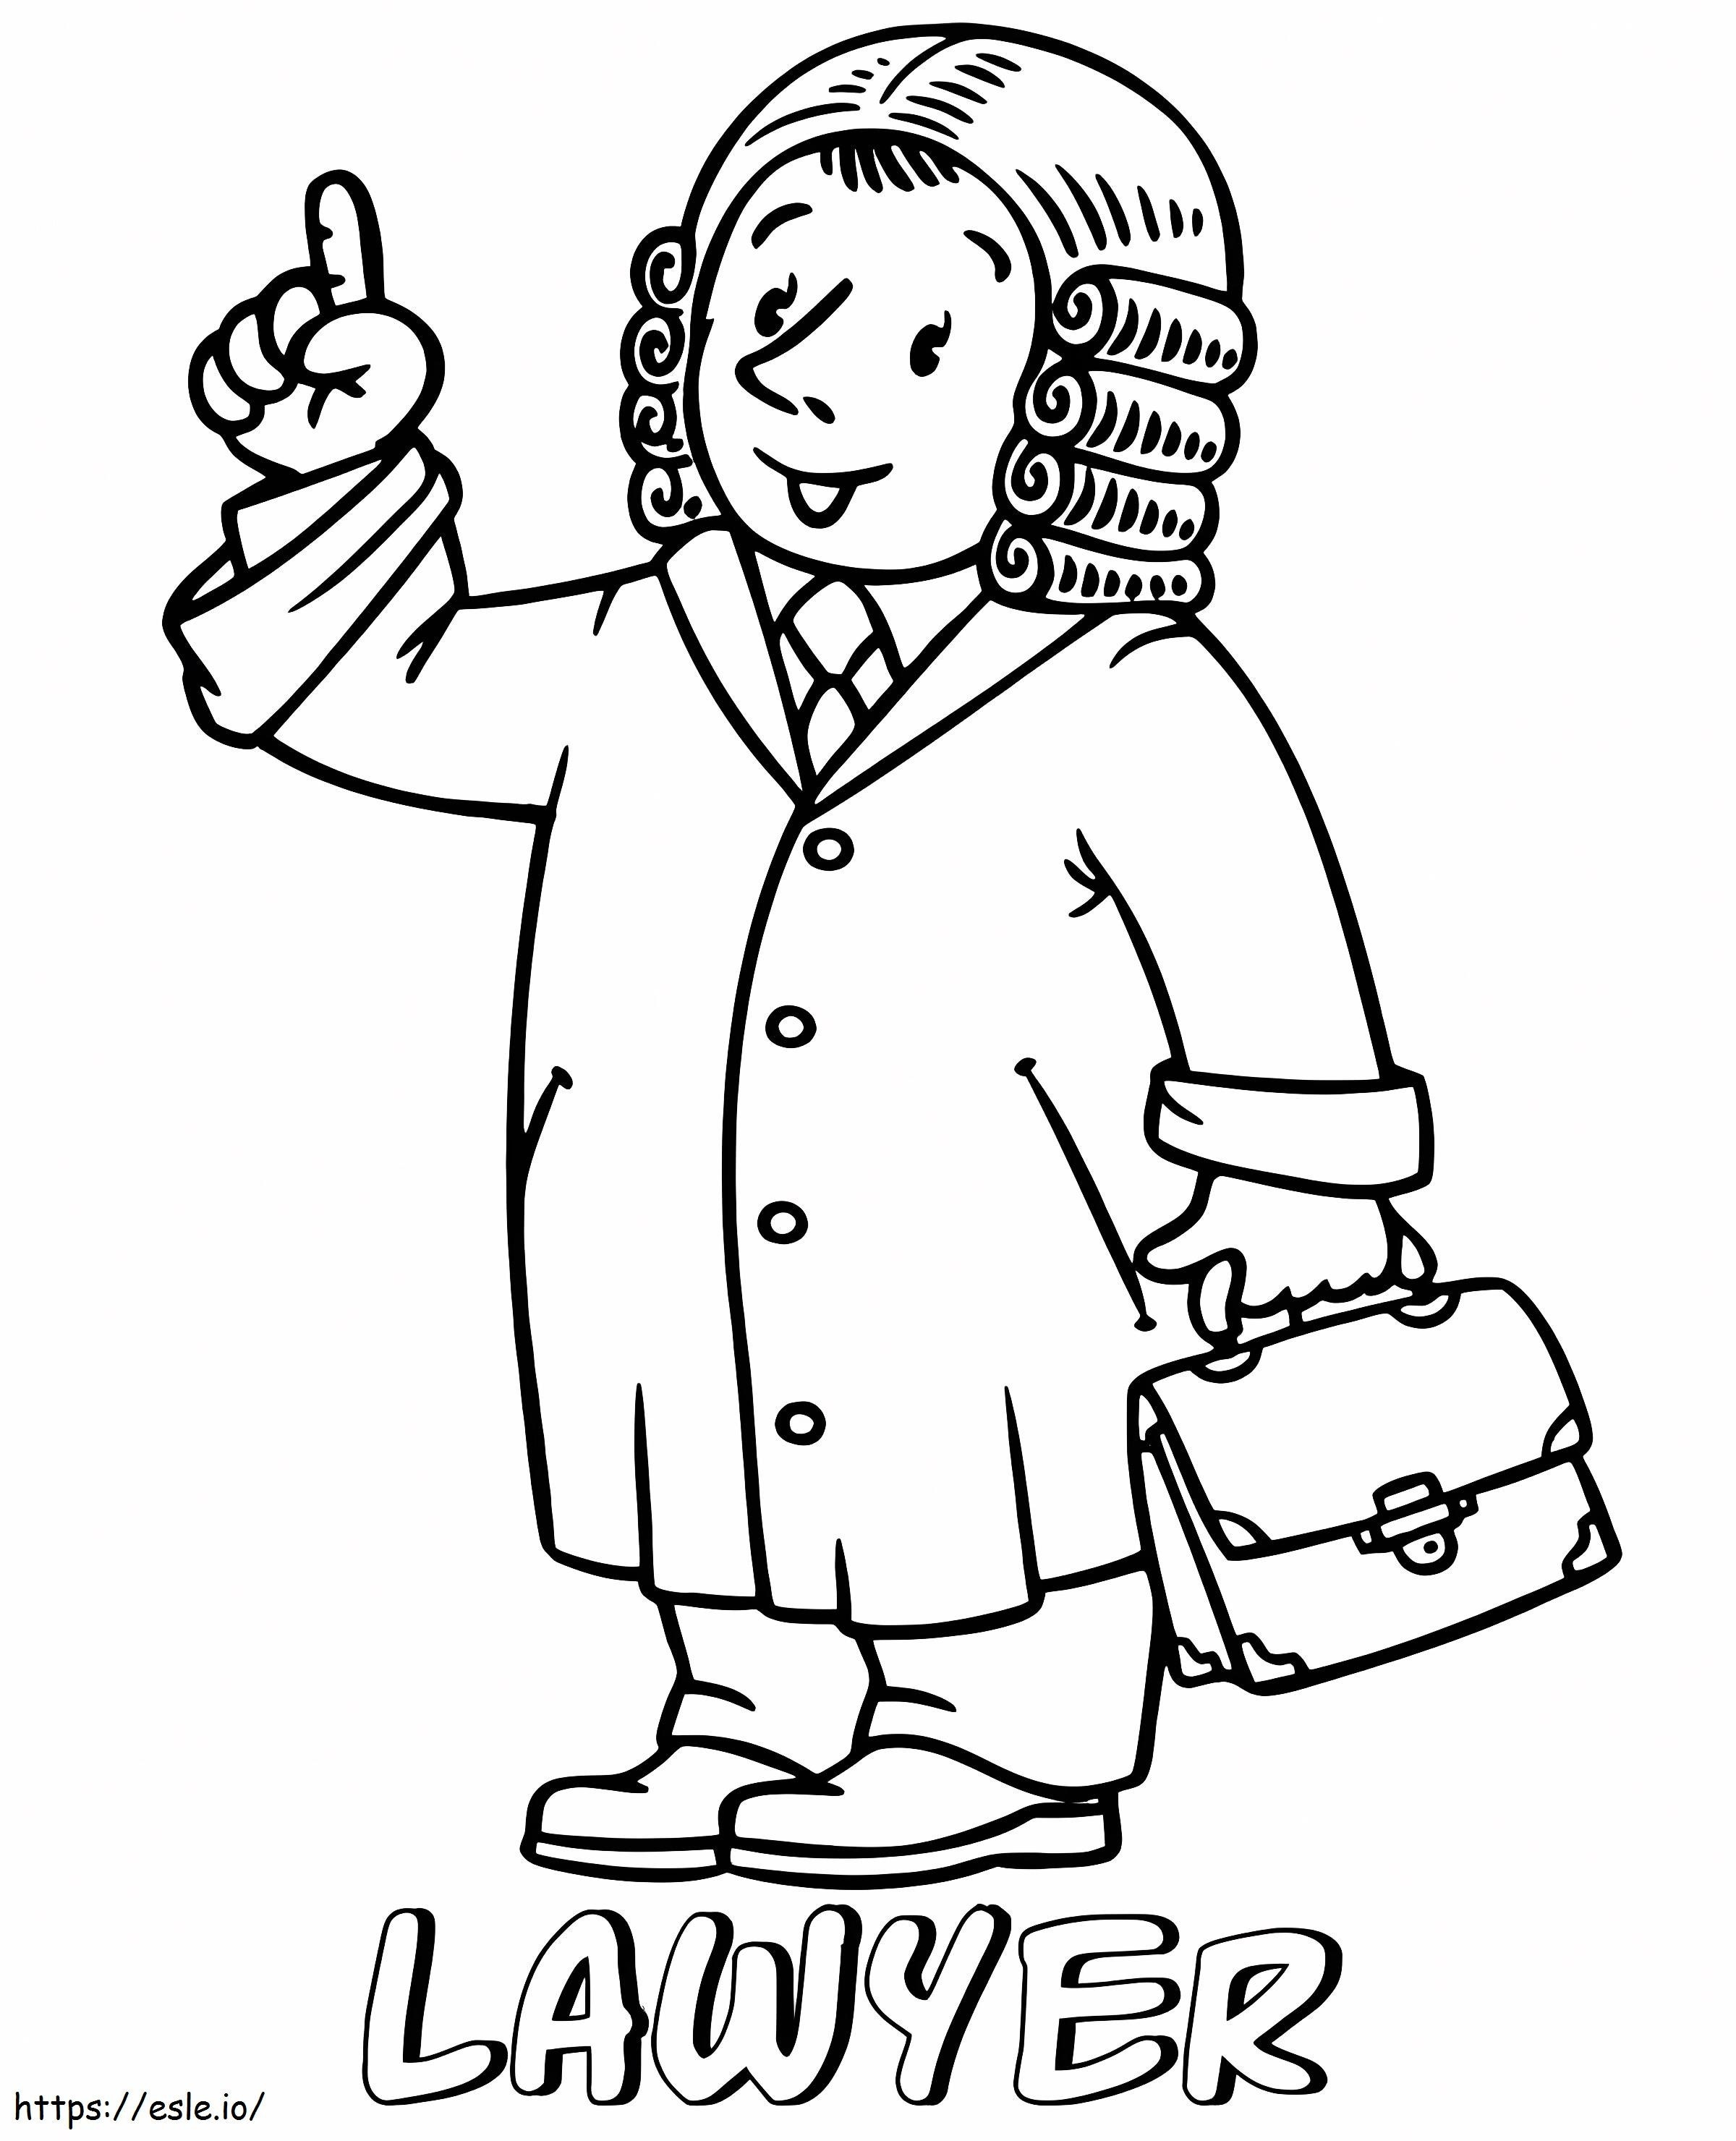 Lawyer 7 coloring page